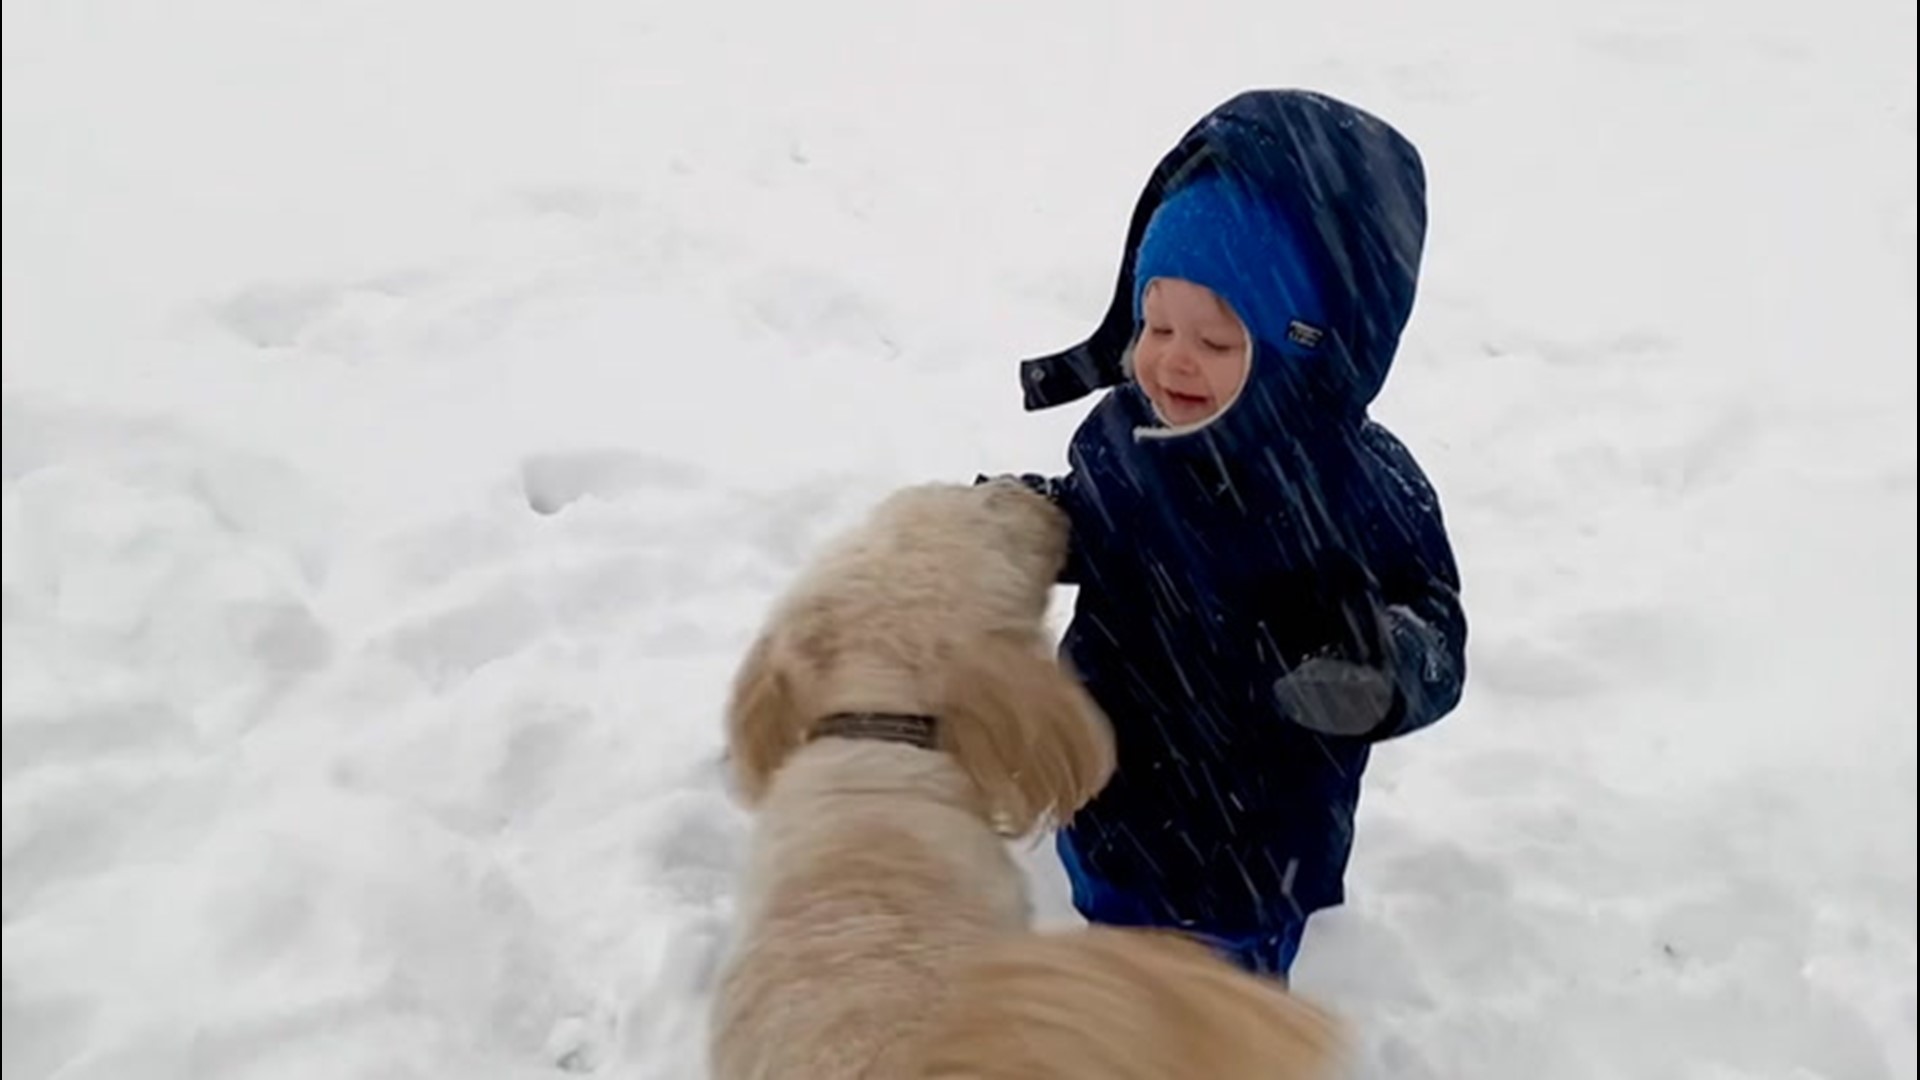 Little one-year-old Luca couldn't stop giggling as his dog ran around in the snow after some heavy snowfall in Port Matilda, Pennsylvania, on Dec. 16.